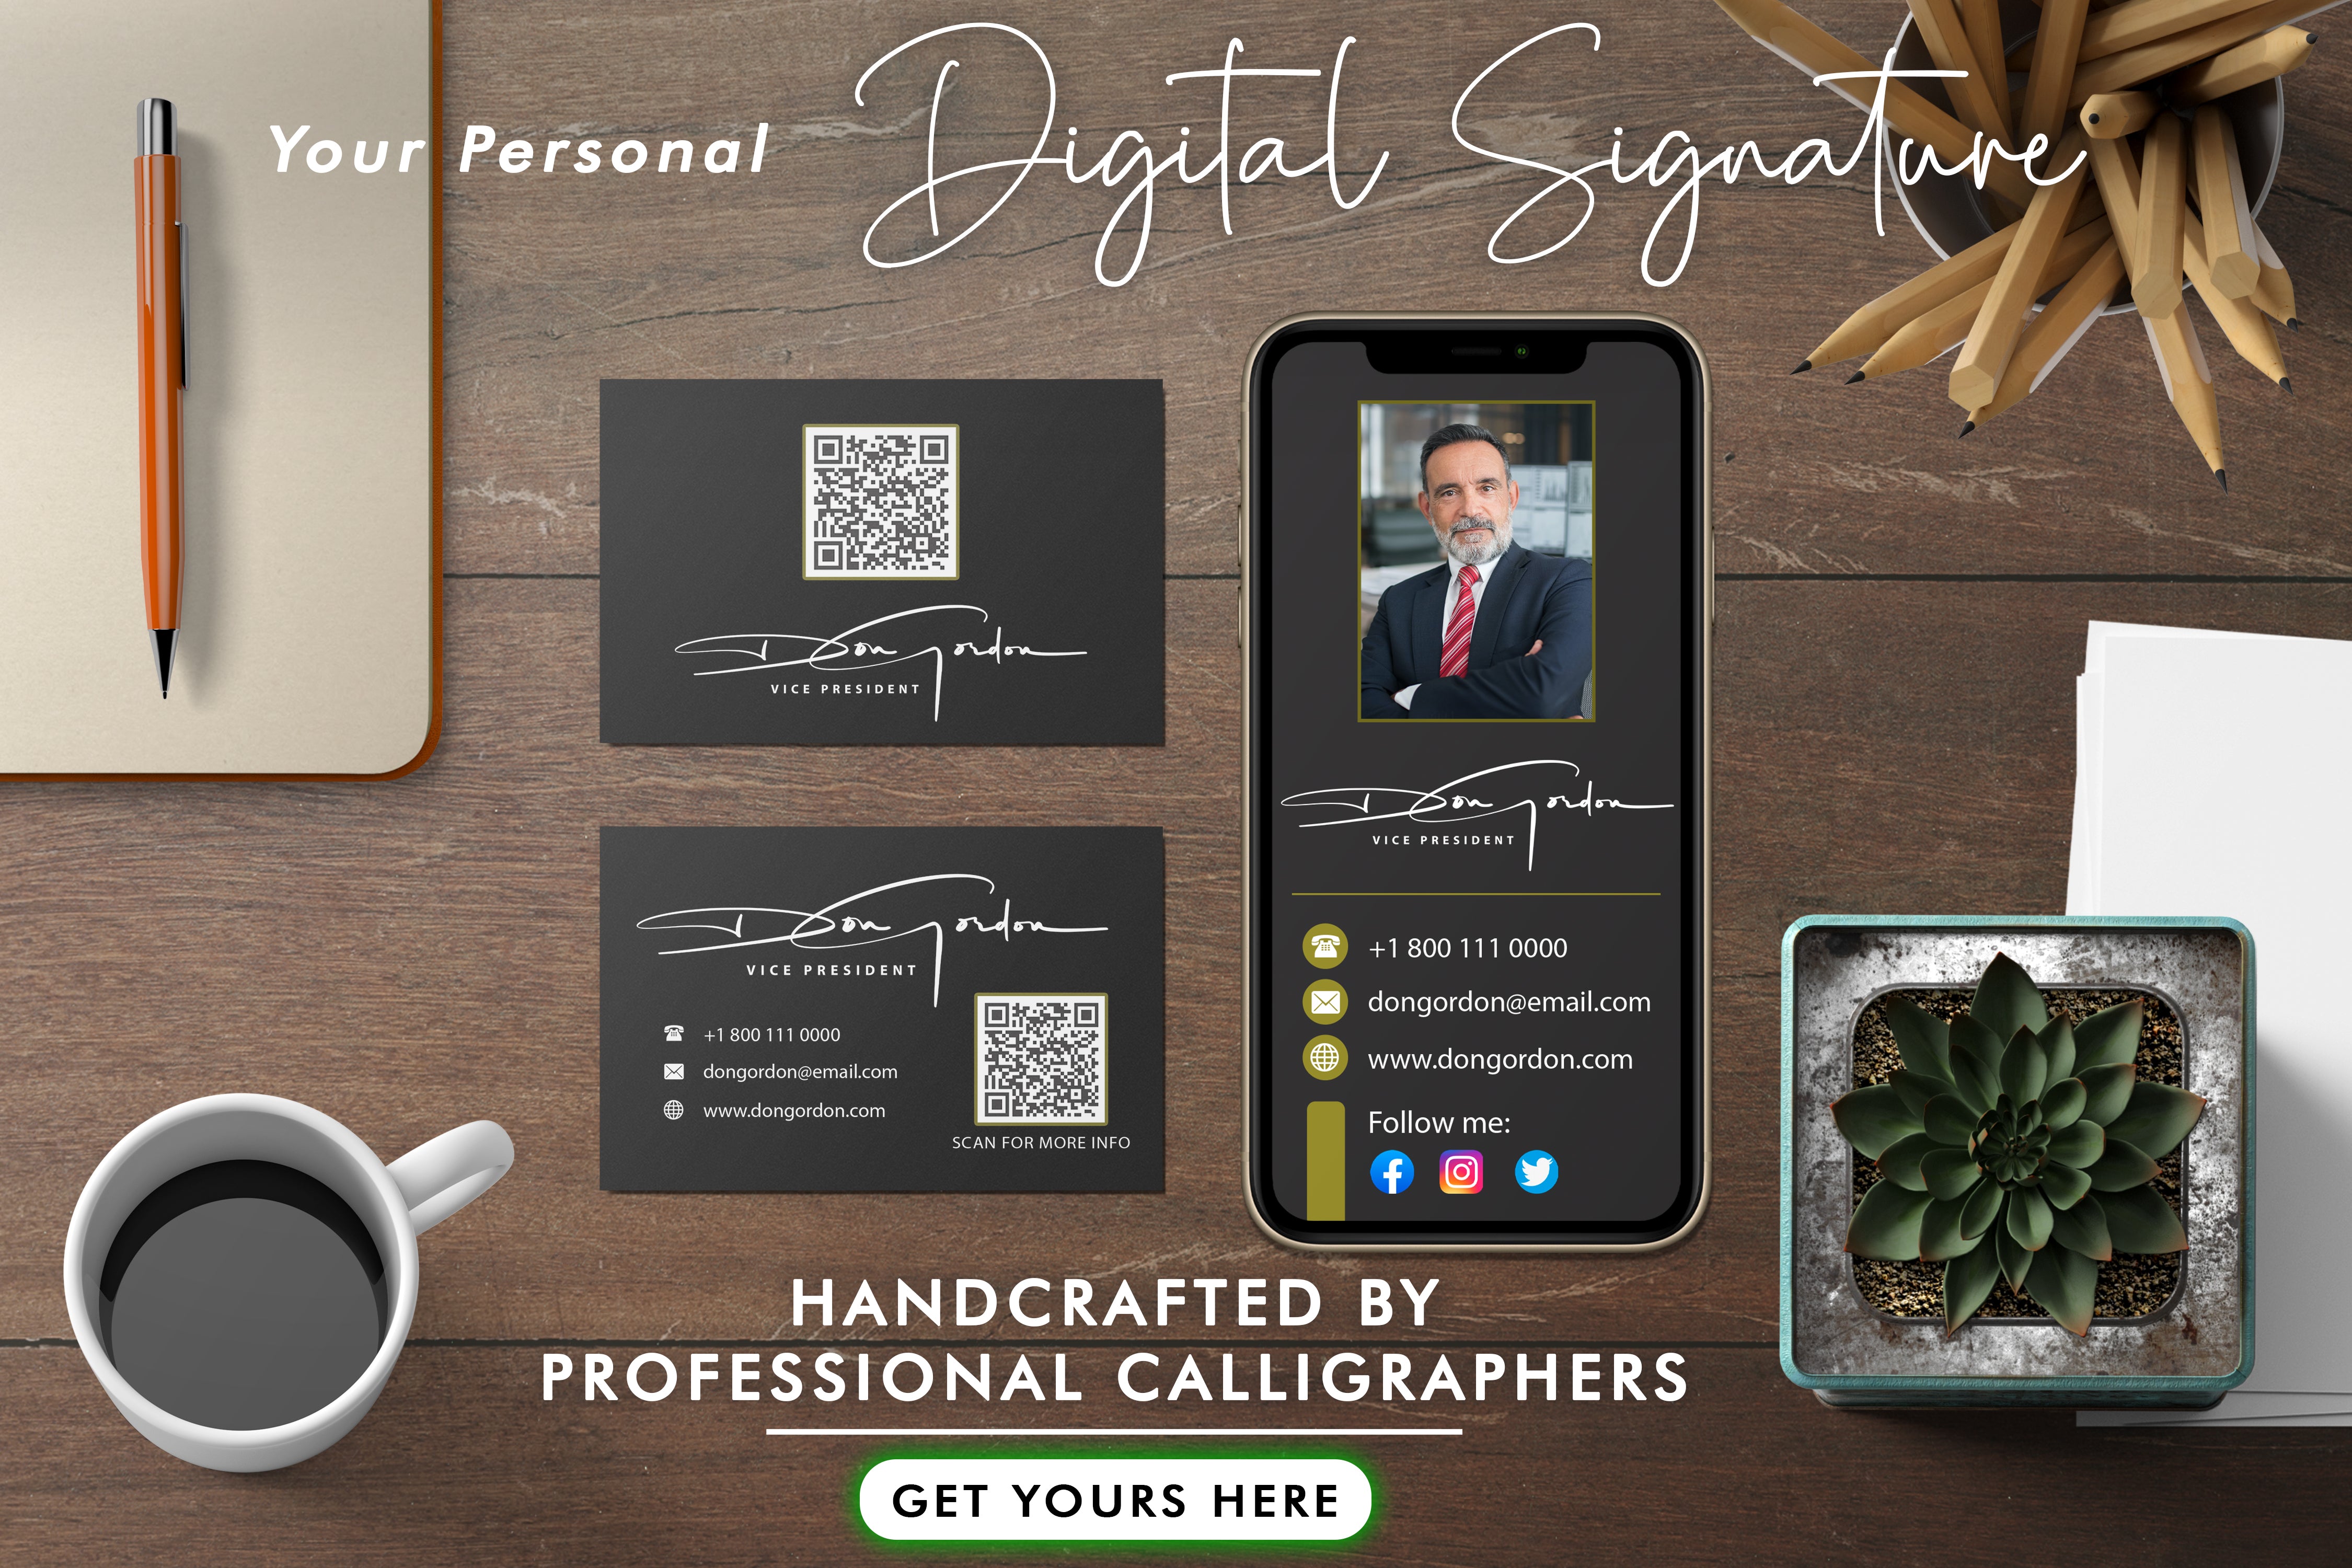 Learn why every startup needs digital business cards for companies. This blog post provides expert advice and insights for small business owners.